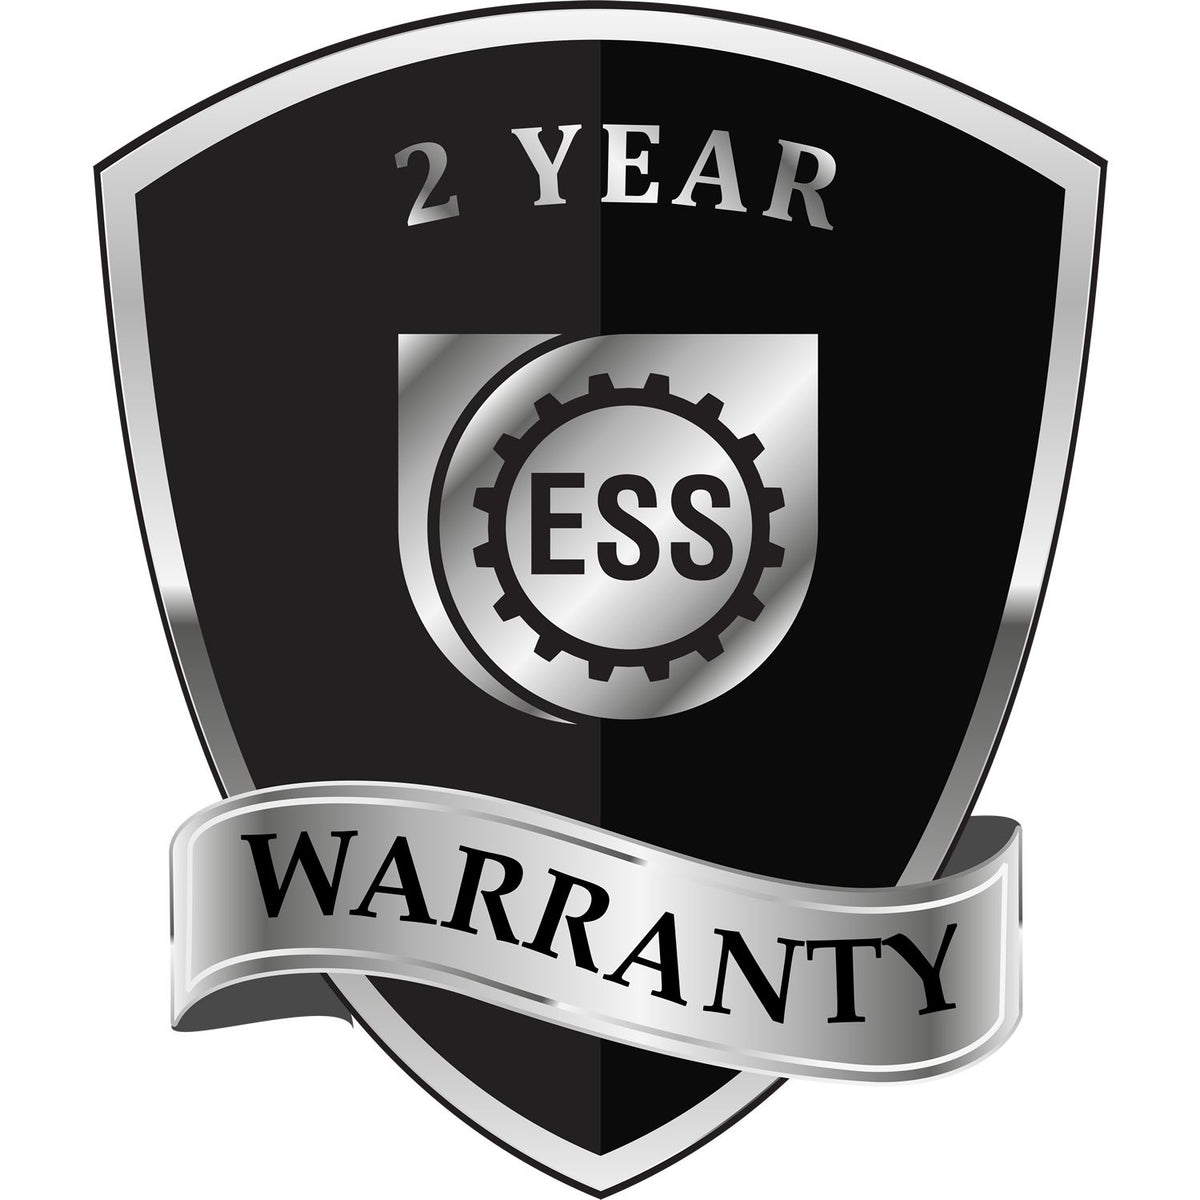 A badge or emblem showing a warranty icon for the Handheld Ohio Professional Engineer Embosser